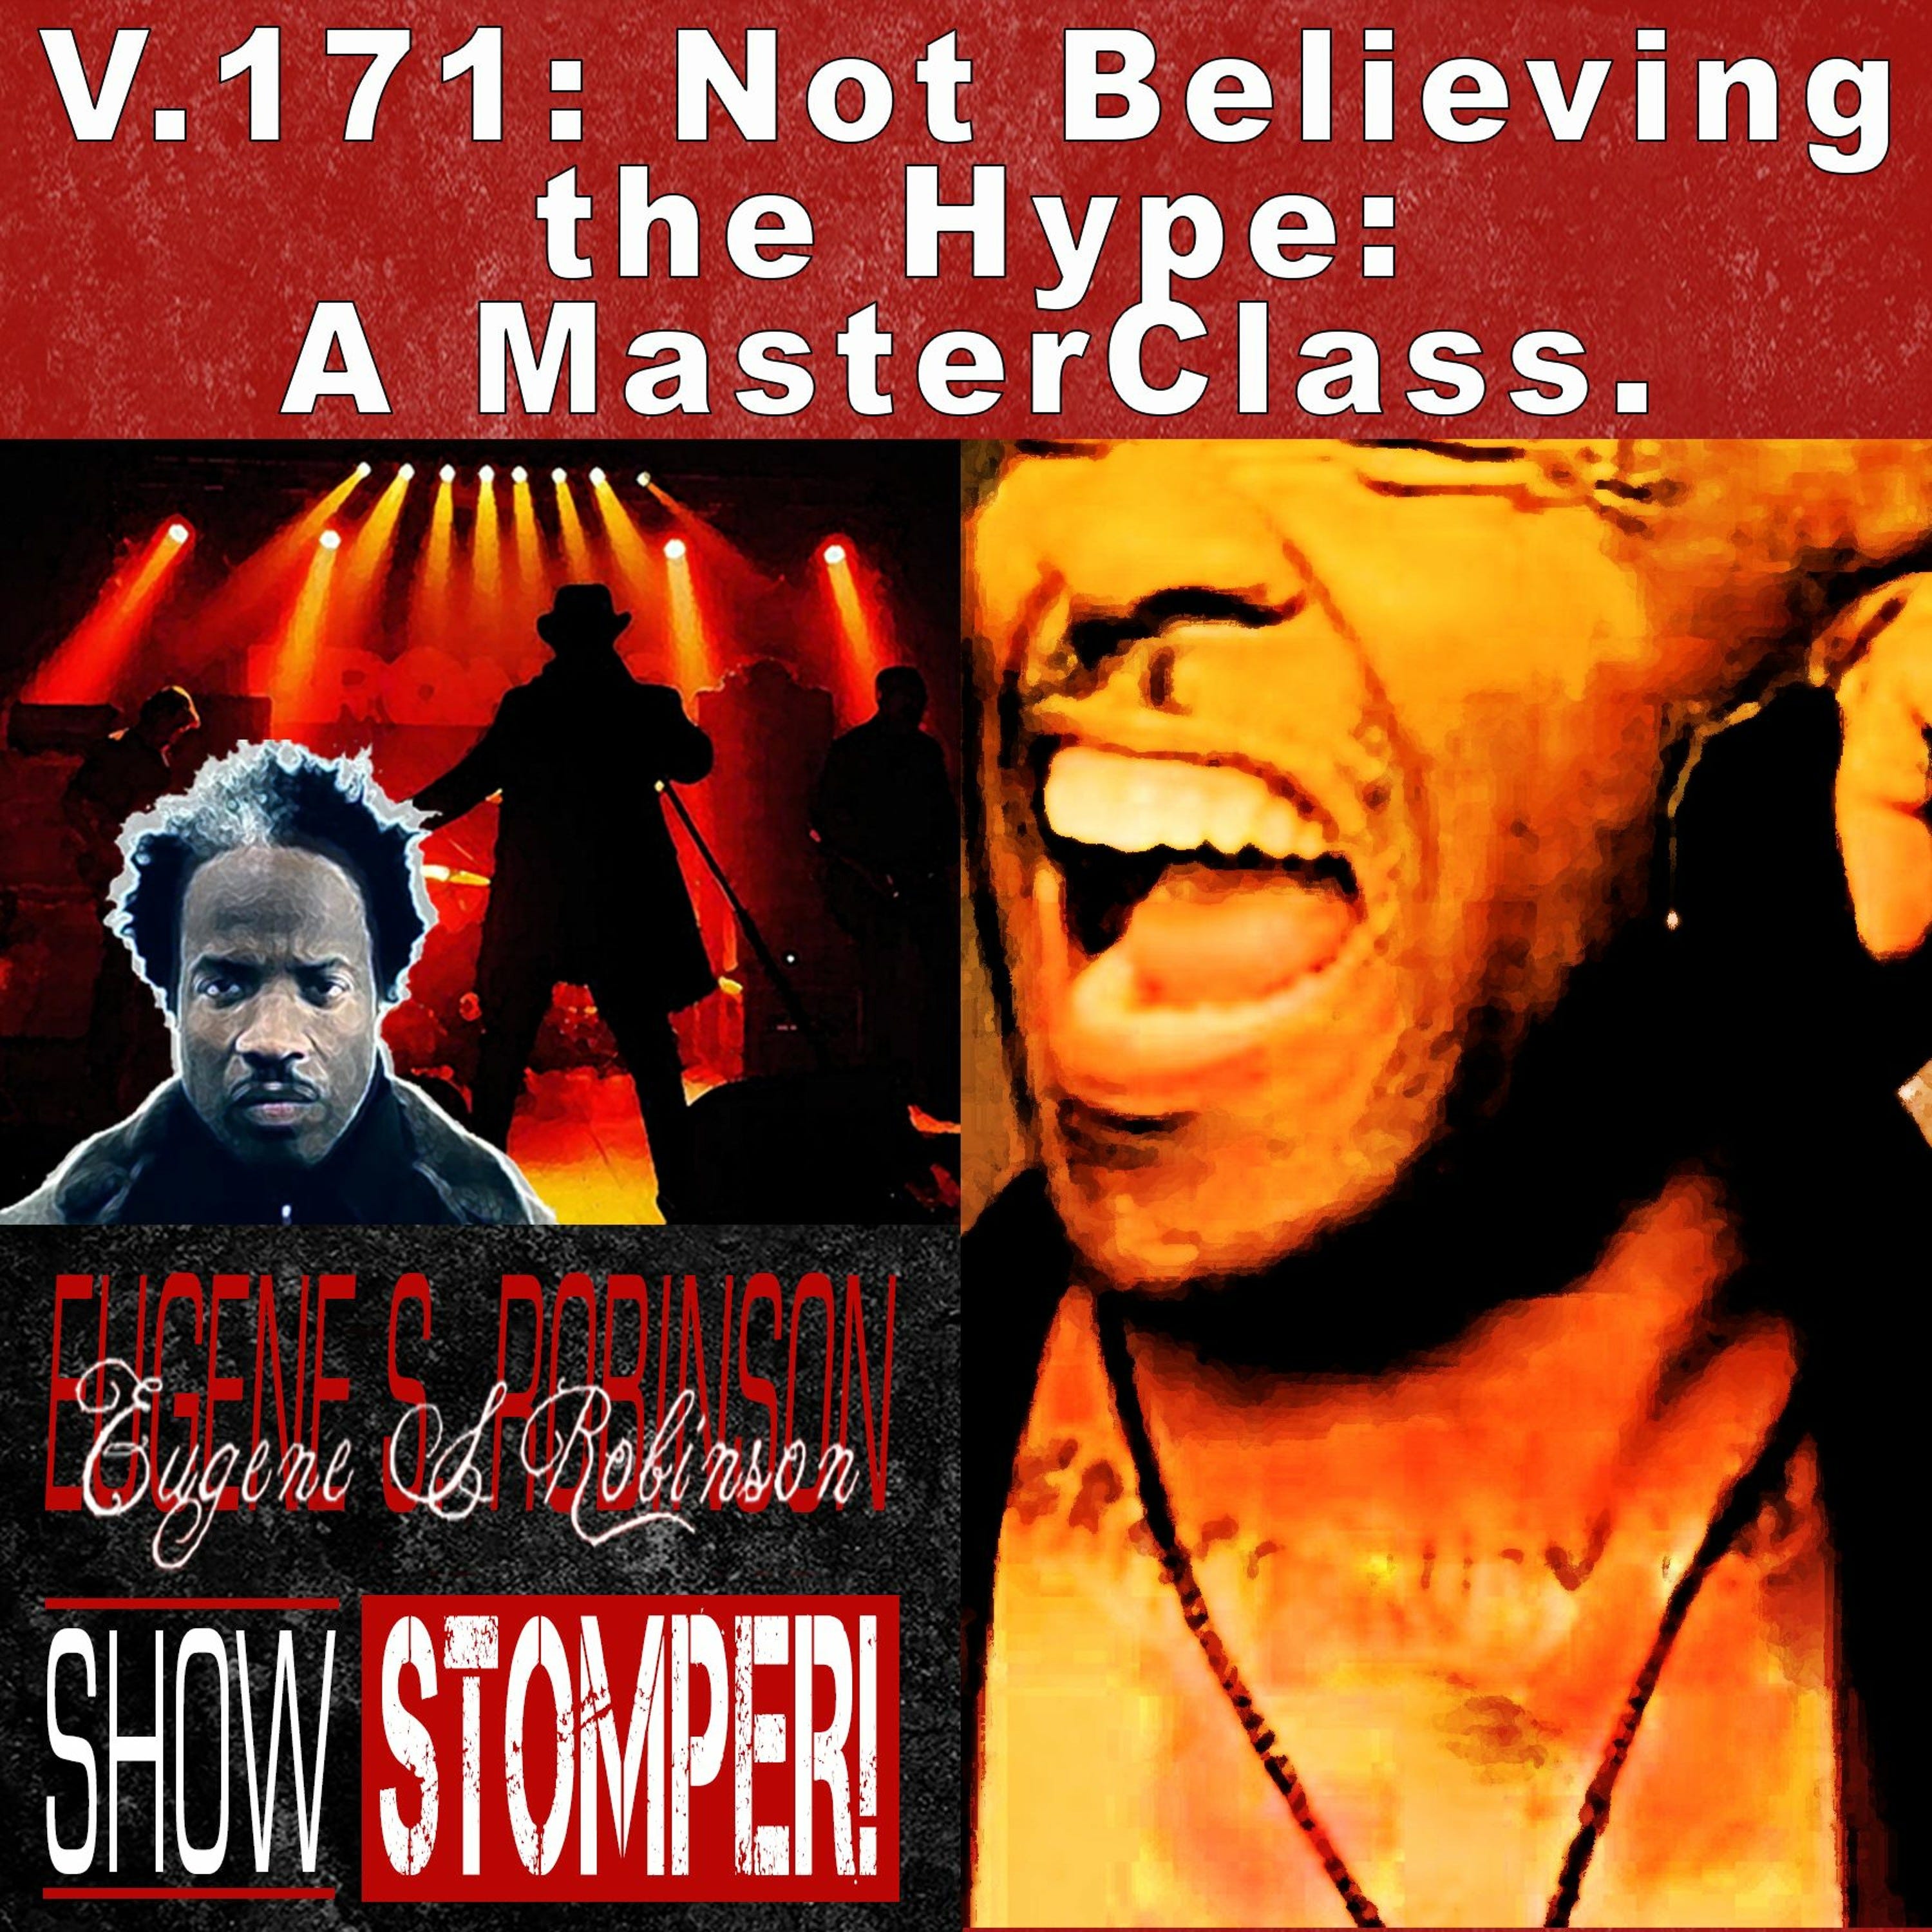 V.171 Not Believing The Hype A MasterClass. On The Eugene S. Robinson Show Stomper!